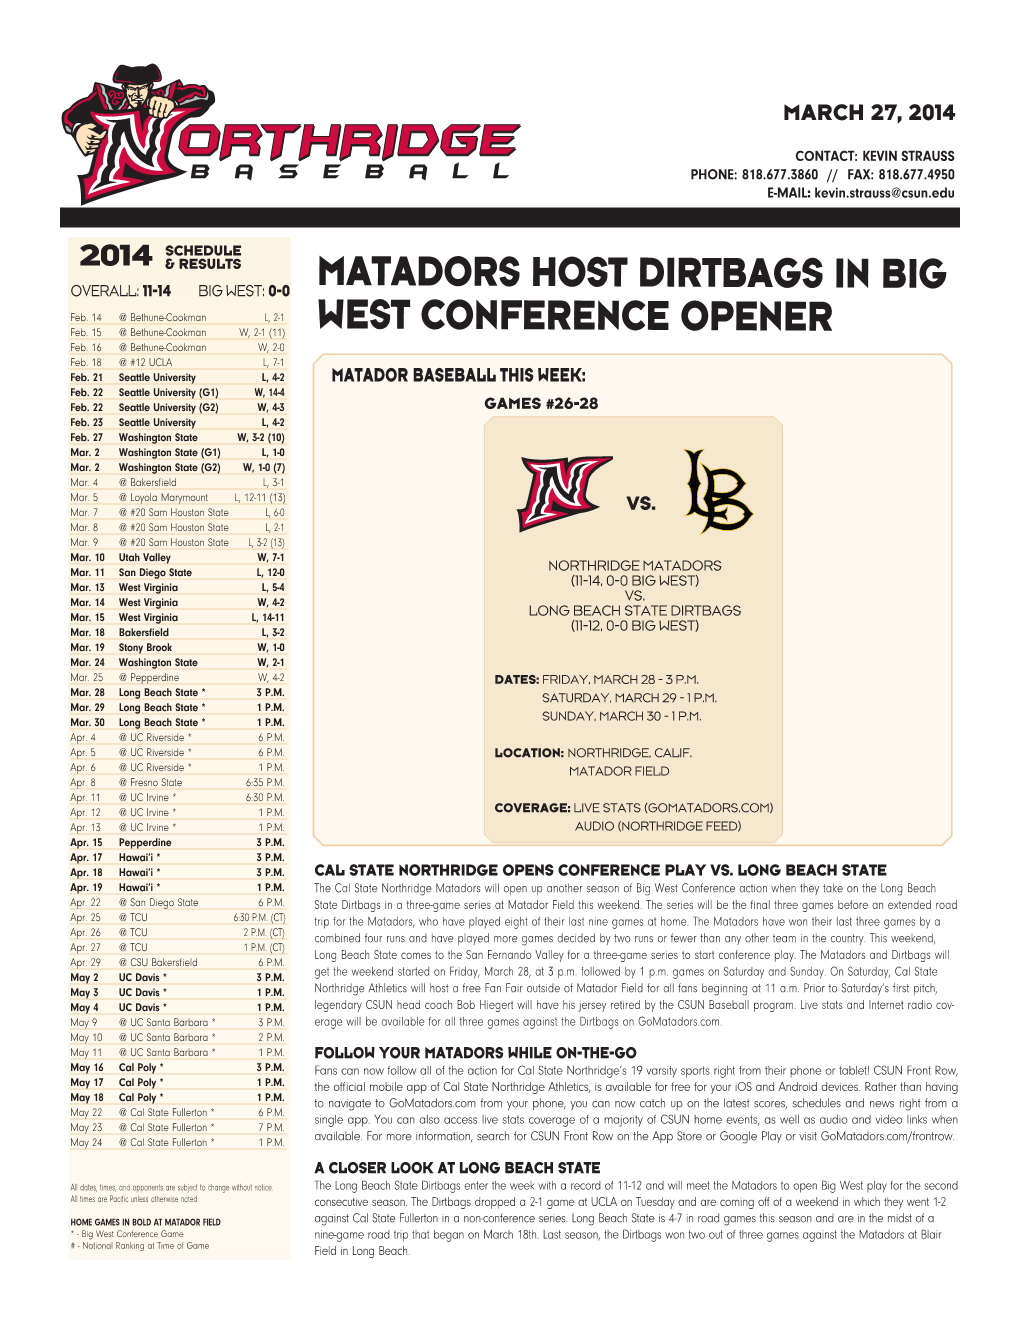 Matadors Host Dirtbags in Big West Conference Opener